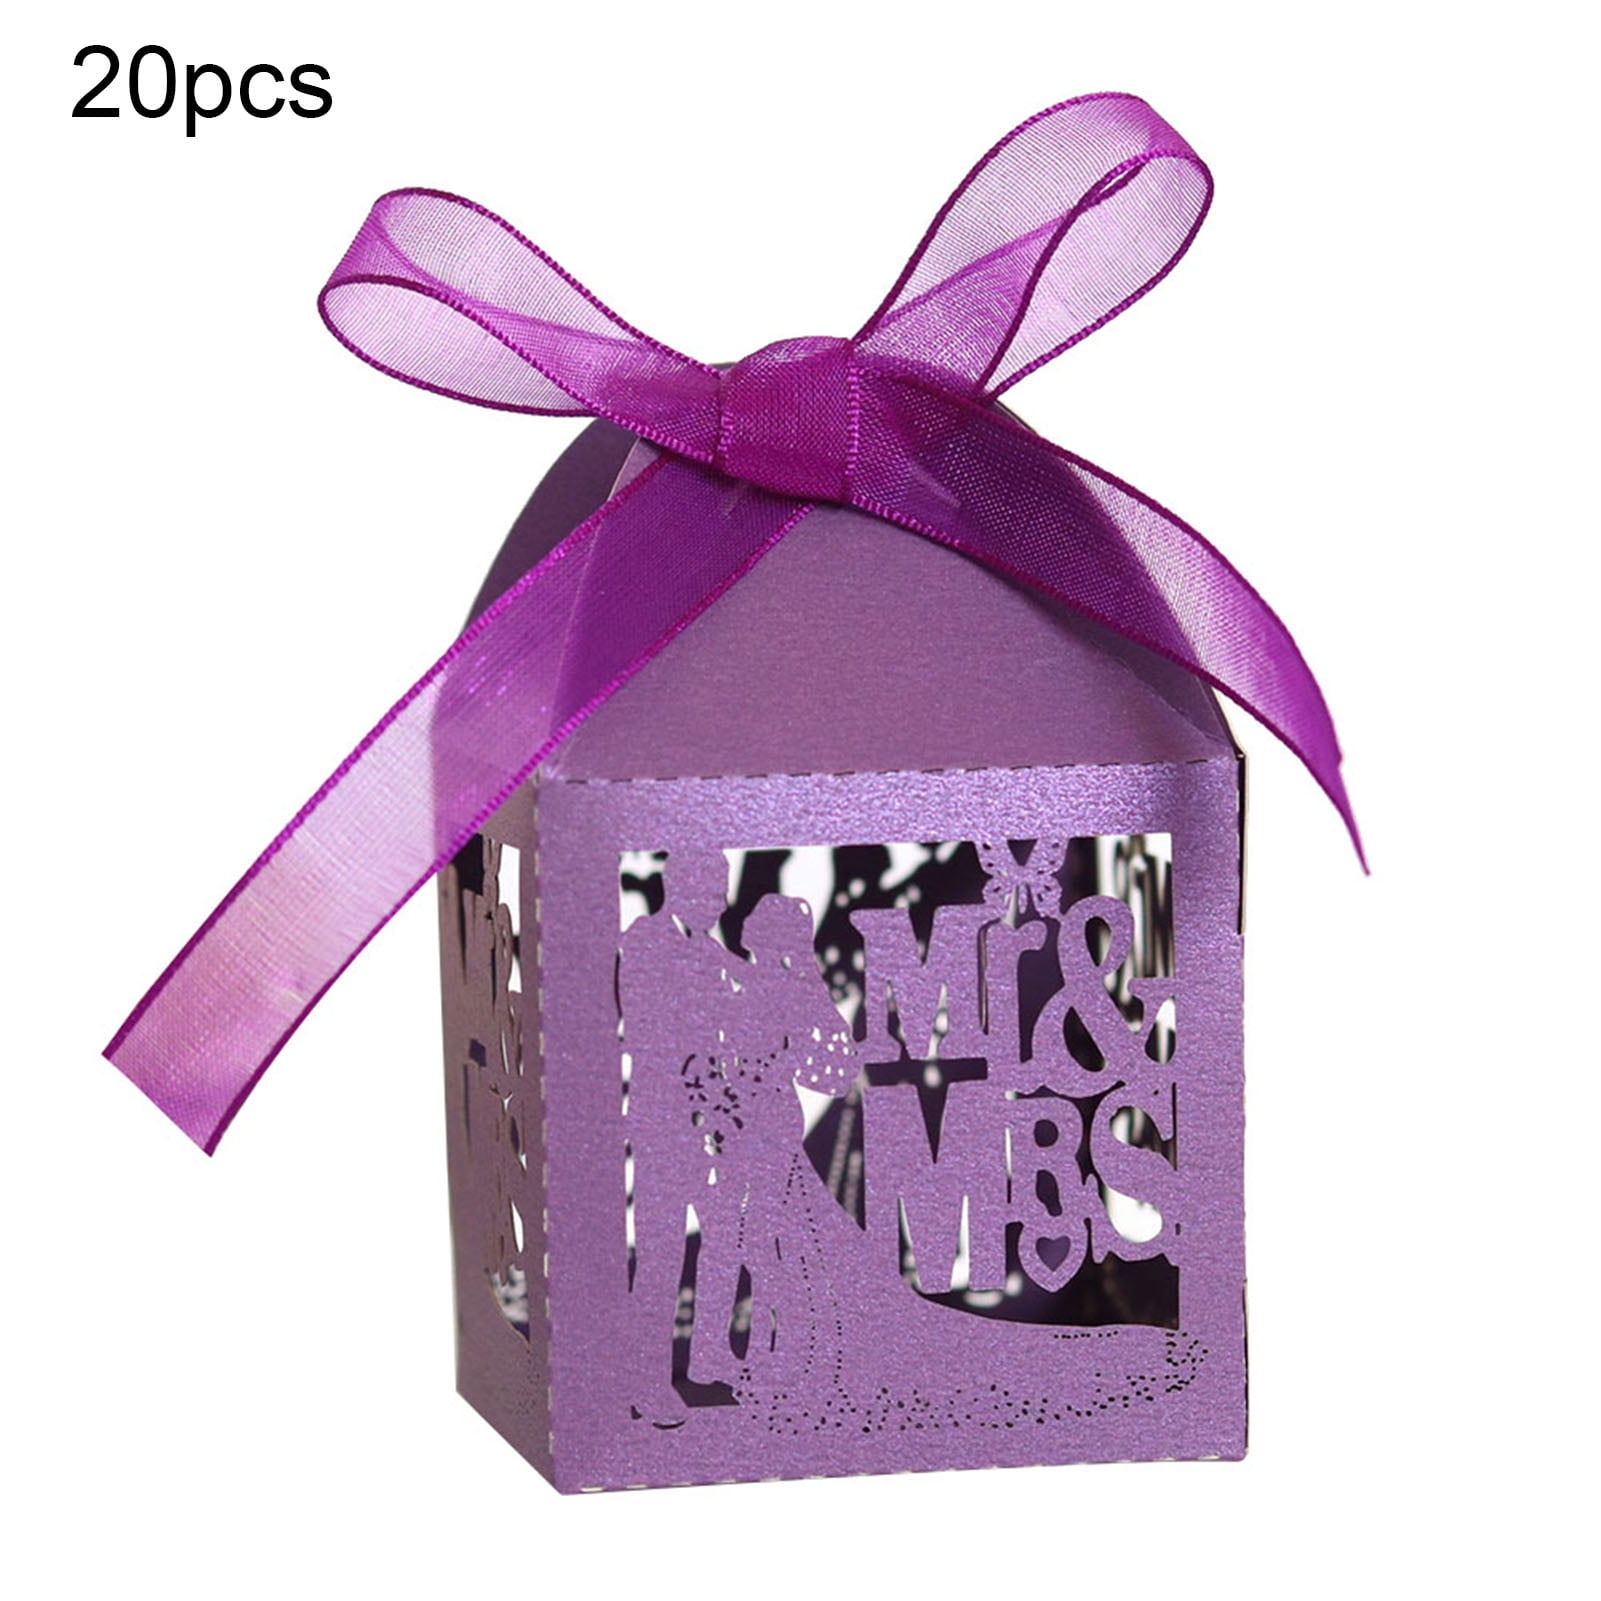 20PCS Cute Candy Shape Plastic Gift Boxes Portable Mini Clear Packaging Boxes 